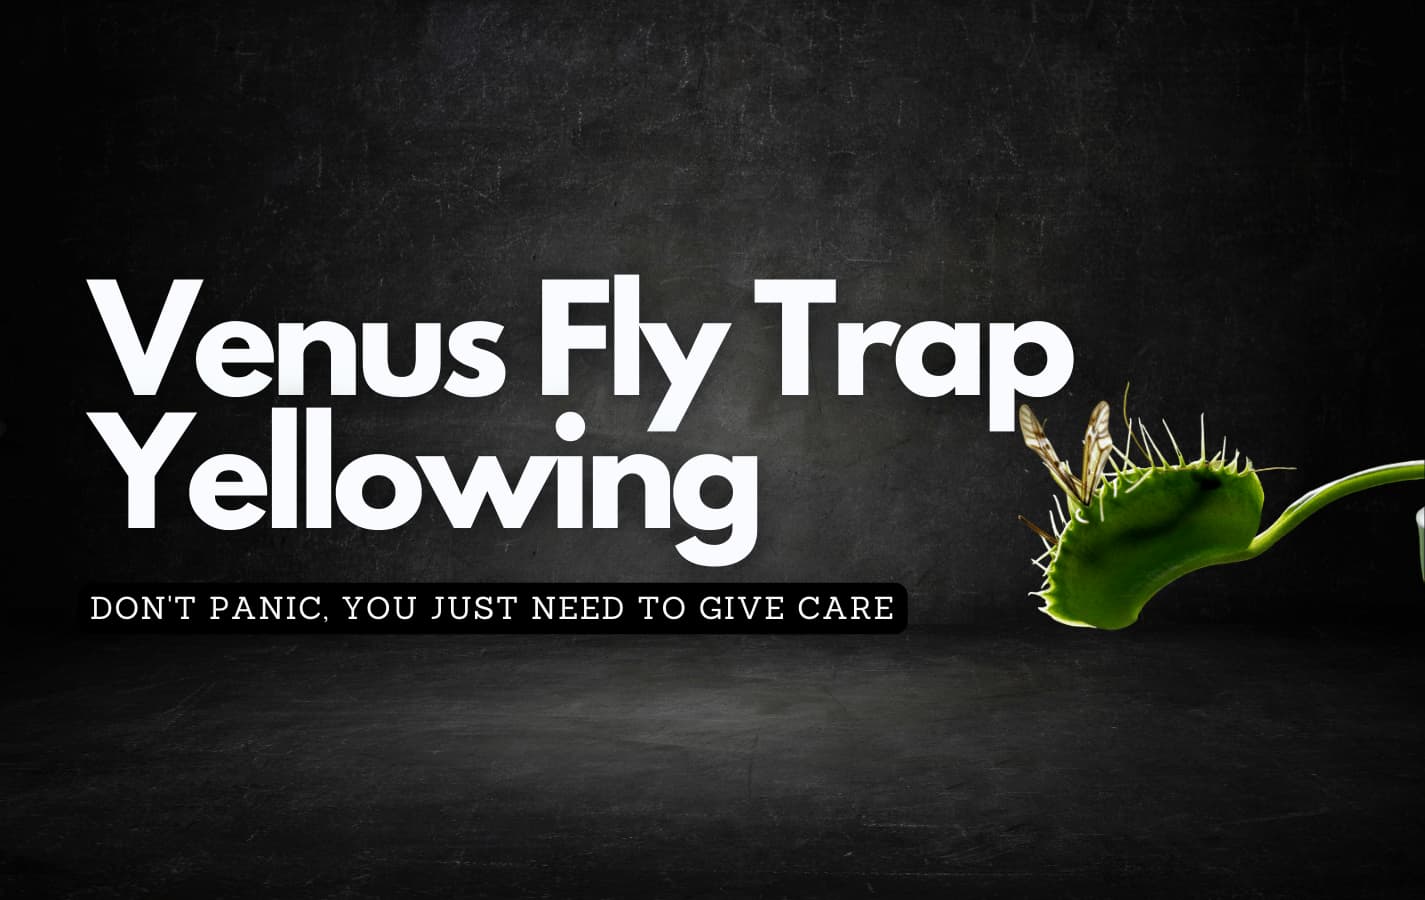 Black background showing off a venus fly trap plant and discussing why venus fly traps yellow and how to care for them